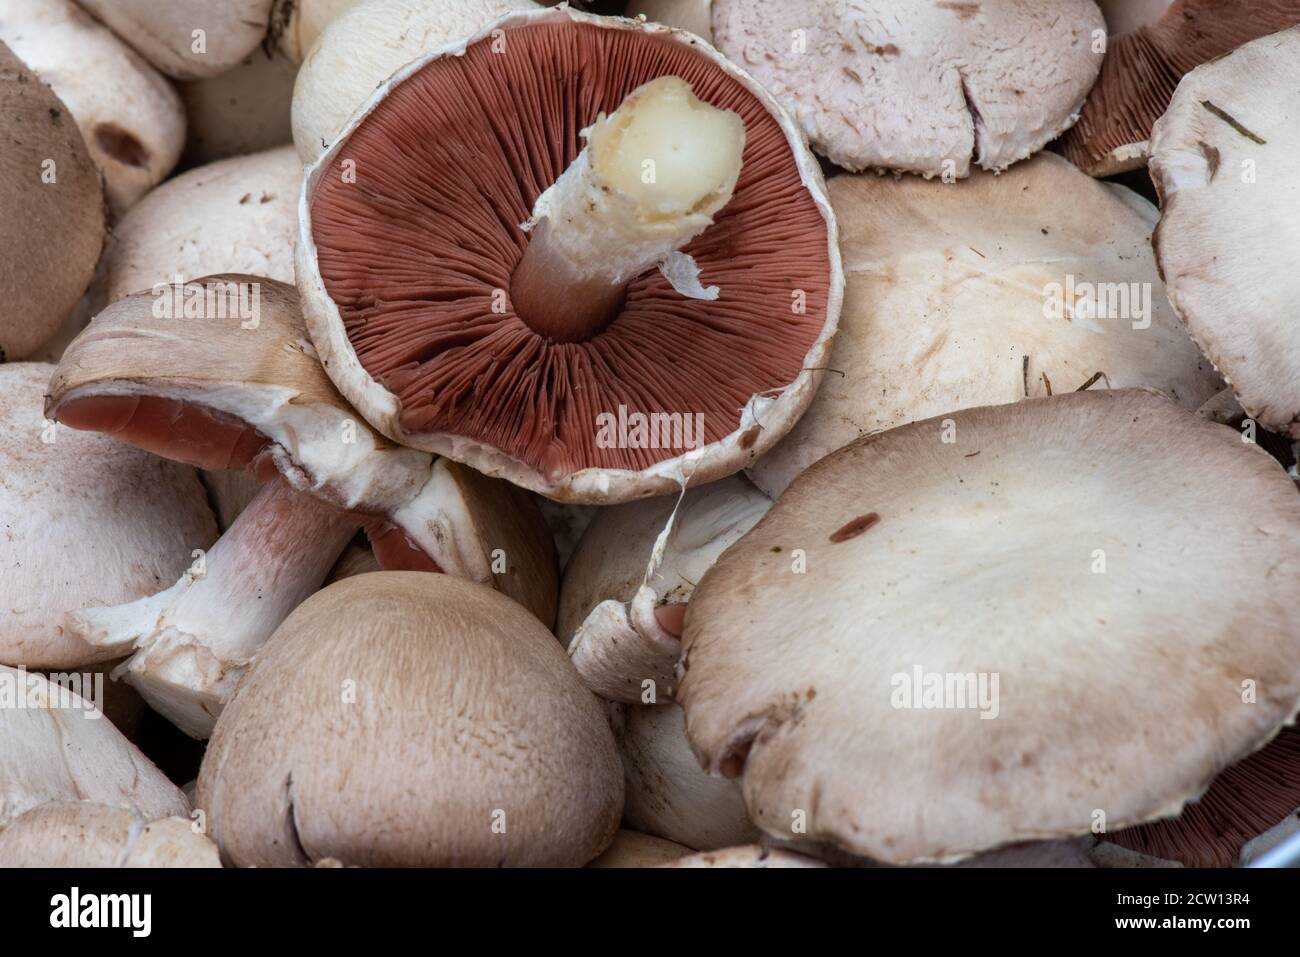 Collection of Mushrooms Stock Photo